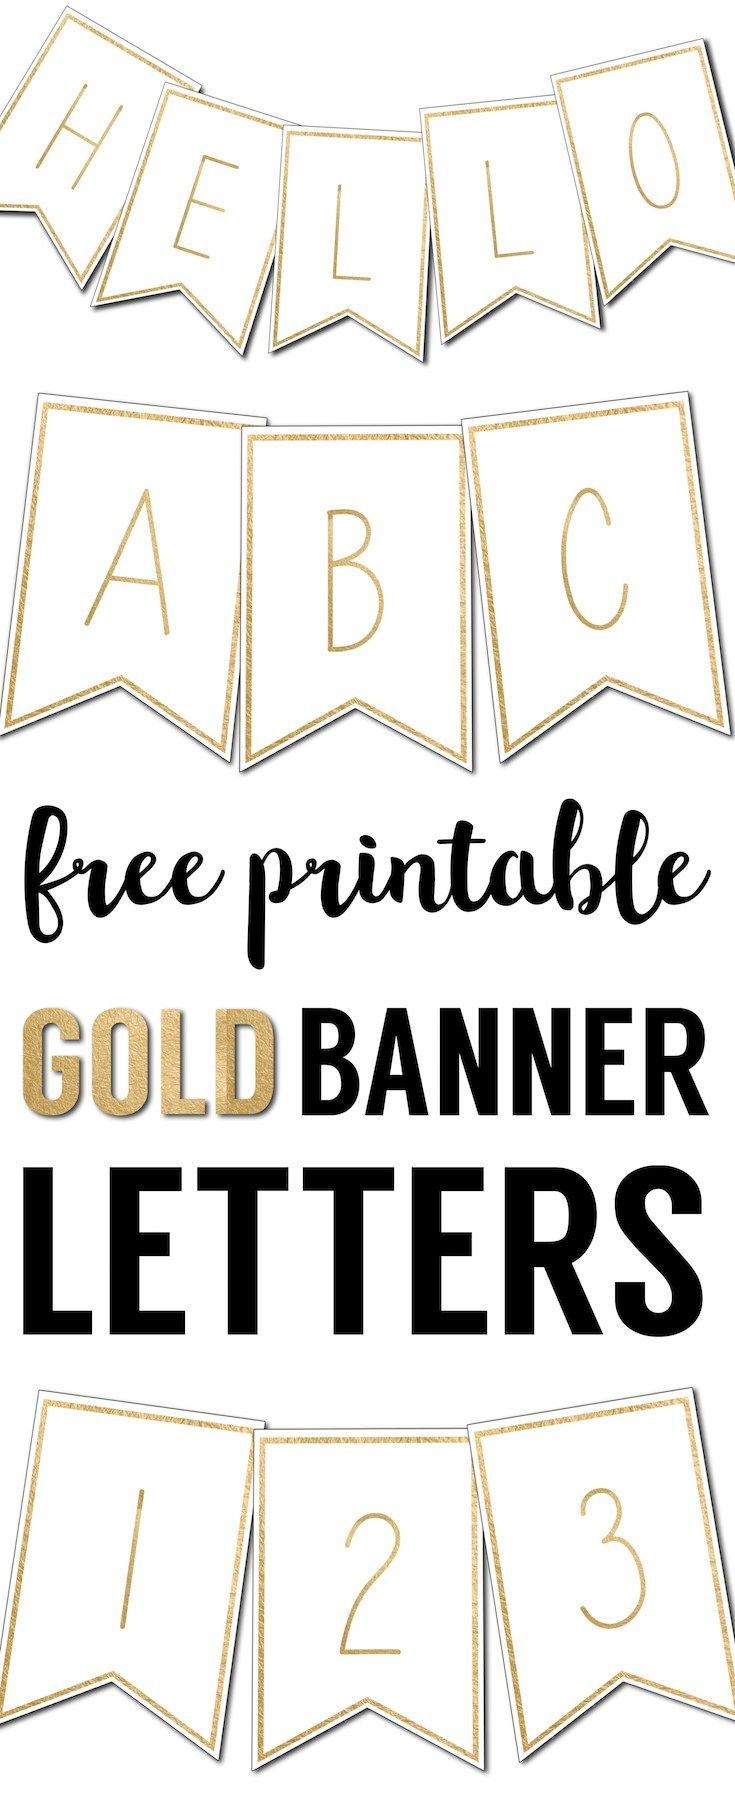 Free Printable Banner Letters Templates | The Wedding Stuff - Free Printable Wedding Banner Letters